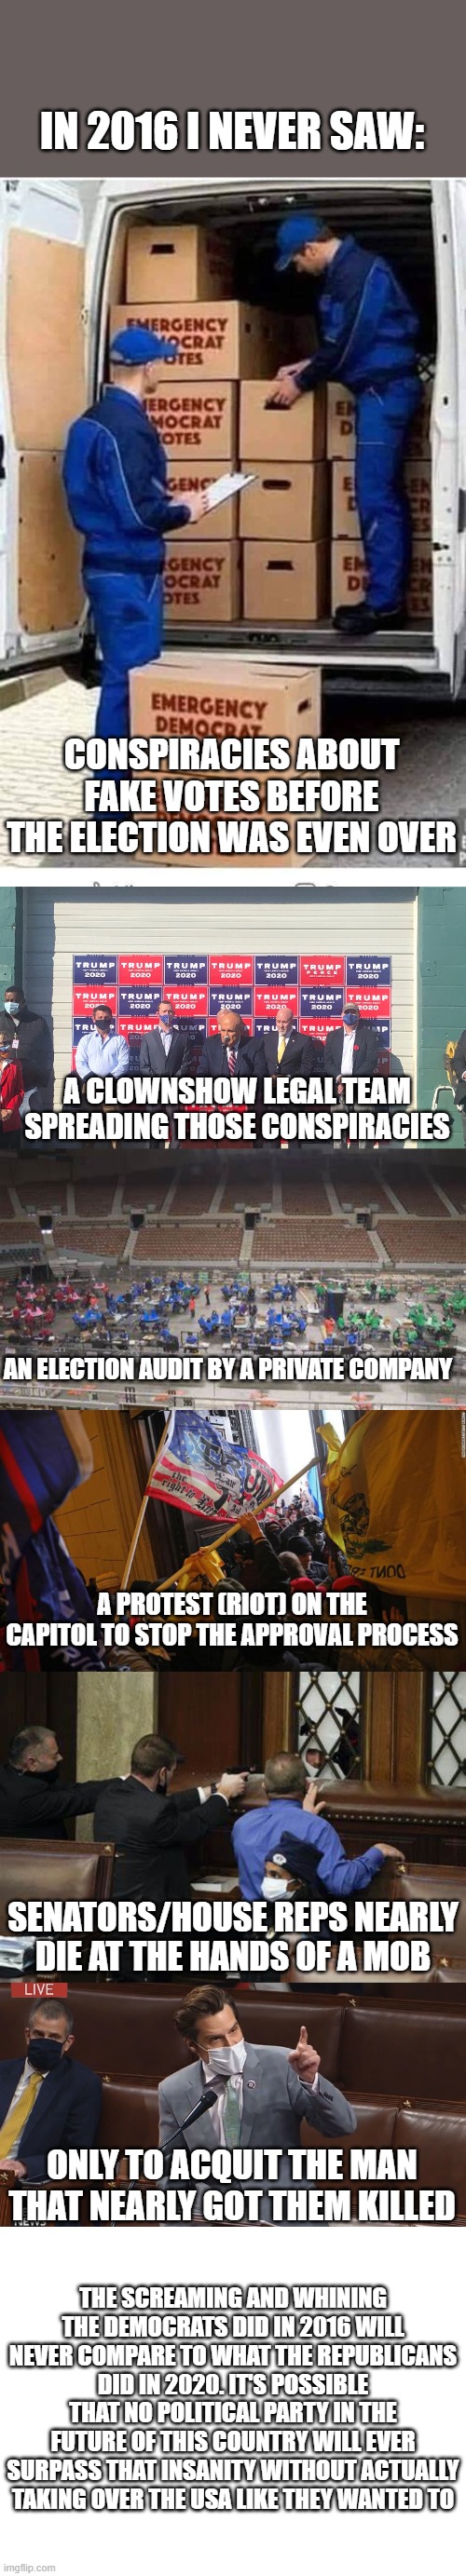 You can never compare 2016 to 2020. | IN 2016 I NEVER SAW:; CONSPIRACIES ABOUT FAKE VOTES BEFORE THE ELECTION WAS EVEN OVER; A CLOWNSHOW LEGAL TEAM SPREADING THOSE CONSPIRACIES; AN ELECTION AUDIT BY A PRIVATE COMPANY; A PROTEST (RIOT) ON THE CAPITOL TO STOP THE APPROVAL PROCESS; SENATORS/HOUSE REPS NEARLY DIE AT THE HANDS OF A MOB; ONLY TO ACQUIT THE MAN THAT NEARLY GOT THEM KILLED; THE SCREAMING AND WHINING THE DEMOCRATS DID IN 2016 WILL NEVER COMPARE TO WHAT THE REPUBLICANS DID IN 2020. IT'S POSSIBLE THAT NO POLITICAL PARTY IN THE FUTURE OF THIS COUNTRY WILL EVER SURPASS THAT INSANITY WITHOUT ACTUALLY TAKING OVER THE USA LIKE THEY WANTED TO | image tagged in emergency democrat votes,blank white template | made w/ Imgflip meme maker